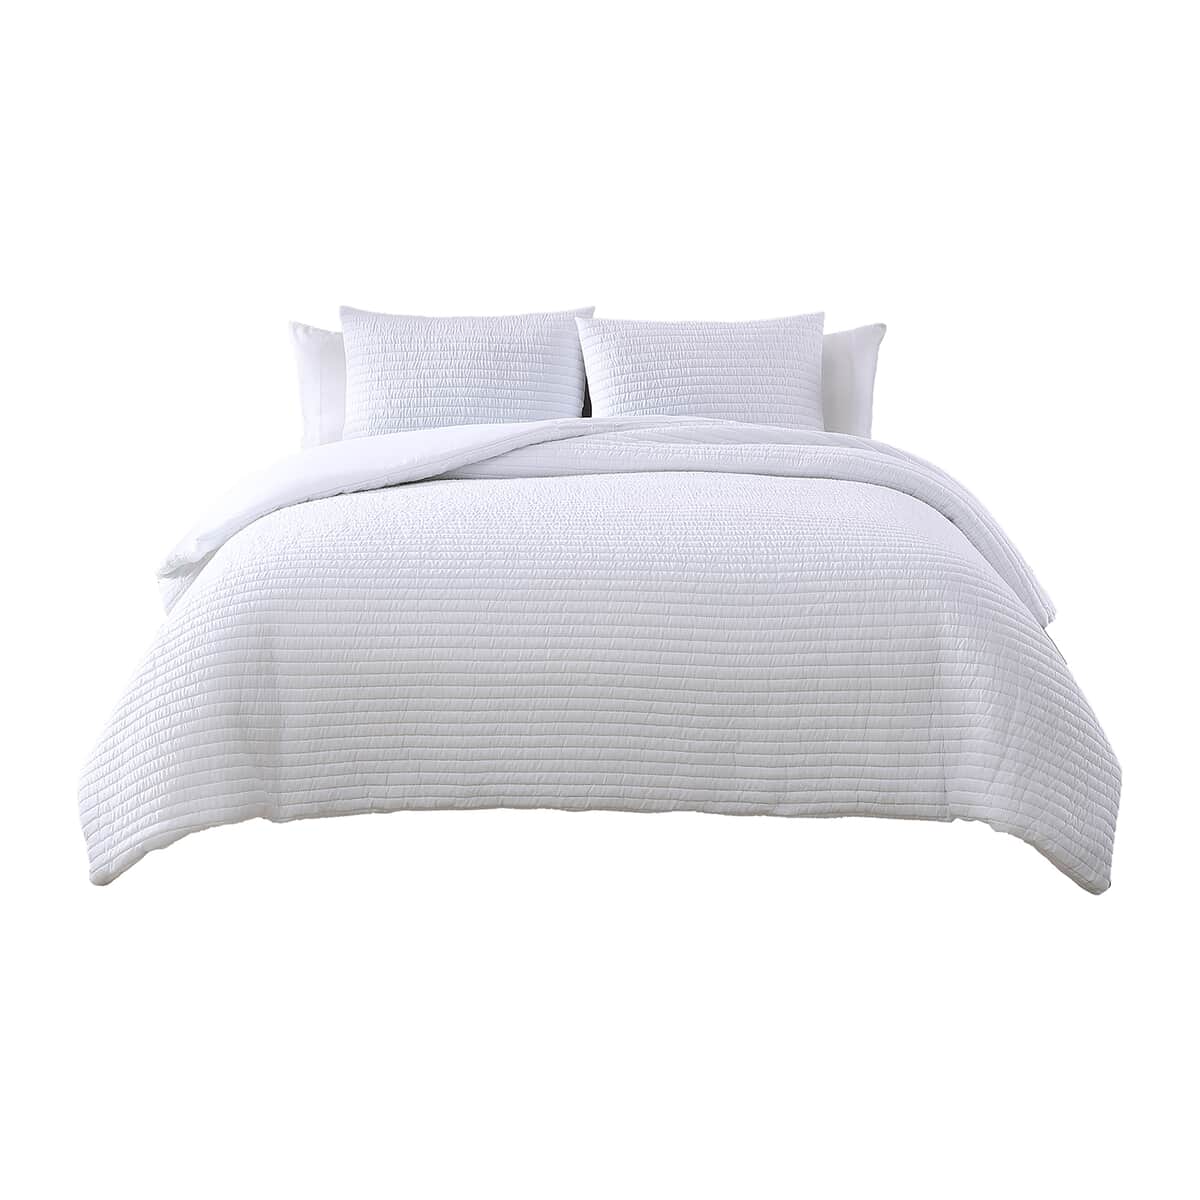 The Nesting Company- Palm 3 Piece Queen Comforter Set White image number 3